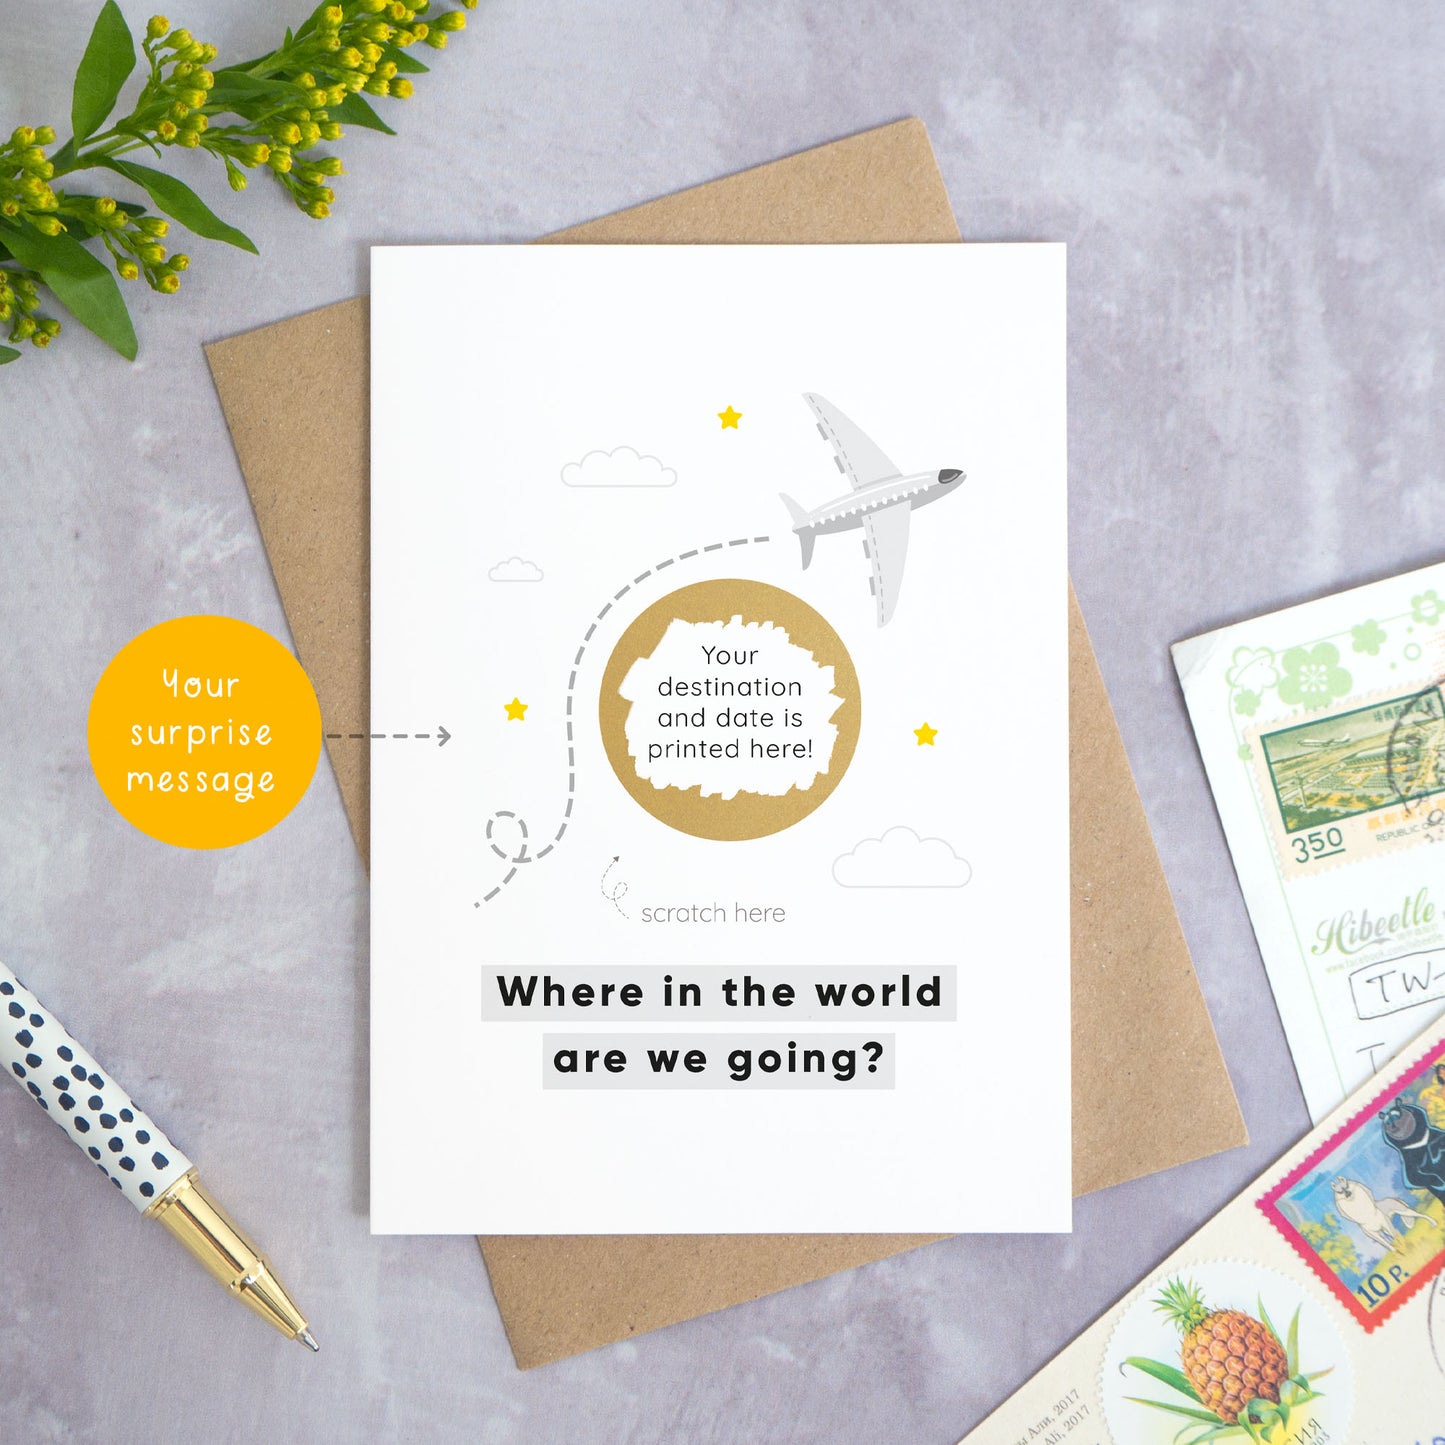 A holiday reveal scratch card featuring a plane flying over the gold scratch panel. The gold panel has been scratched off to reveal the holiday destination. Beneath the plane and scratch panel the text reads: “where in the world are we going”. This card has been shot on a grey background with a pen and foliage. There is also an orange circle pointing to the area which can be personalised. In this case it is the custom message for underneath the scratch panel.